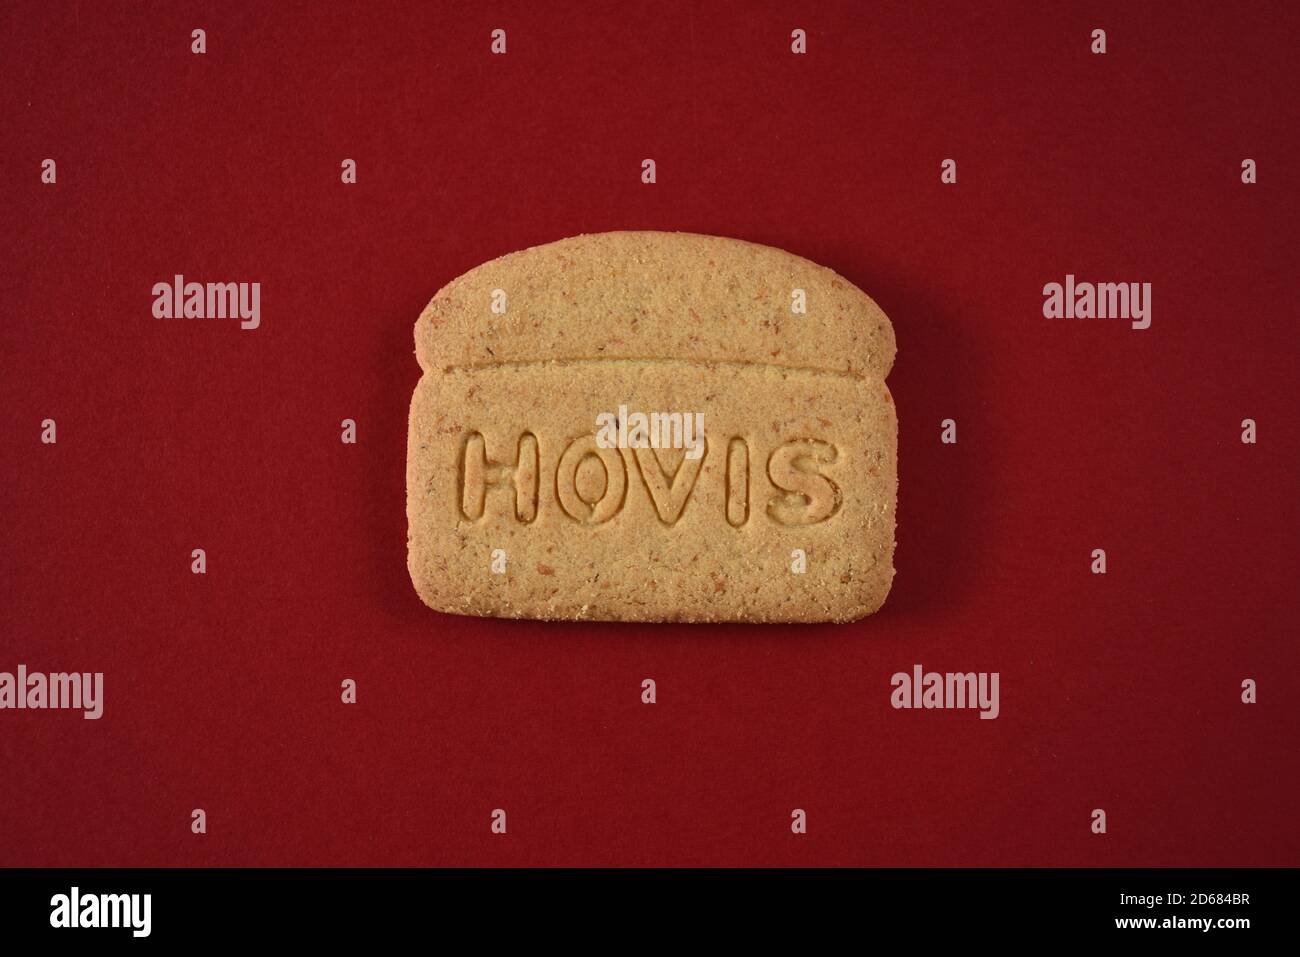 Hovis Biscuit Isolated on a red background Stock Photo